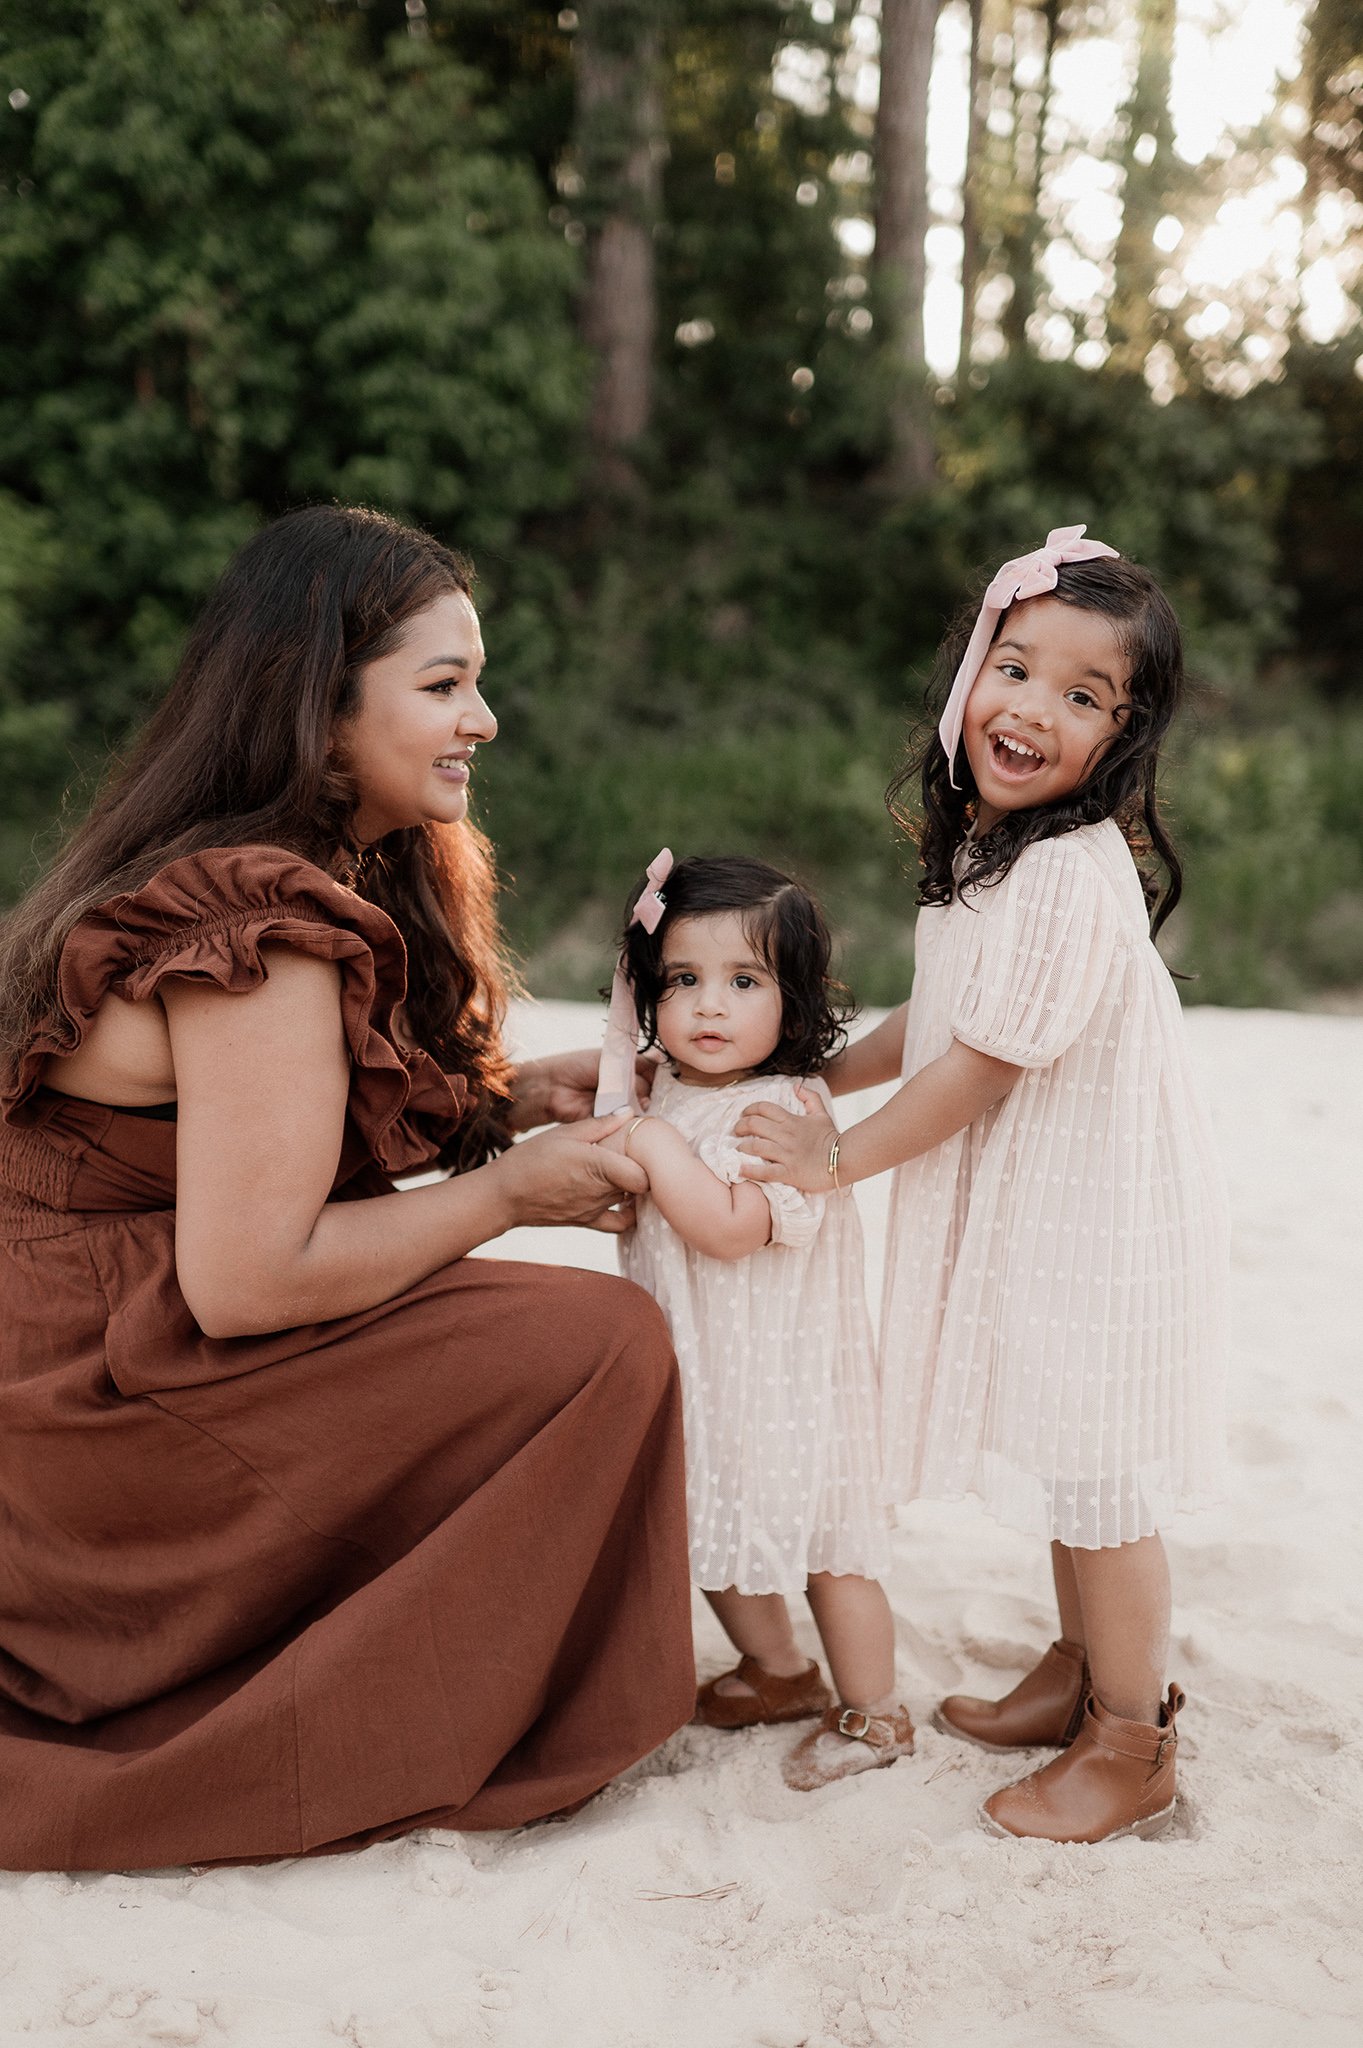 the woodlands family photographer _ conroe photographer _ houston family photographer _ ashley gillen photography _ texas family photographer _ conroe wedding photographer _ conroe texas _ cshi45.jpg